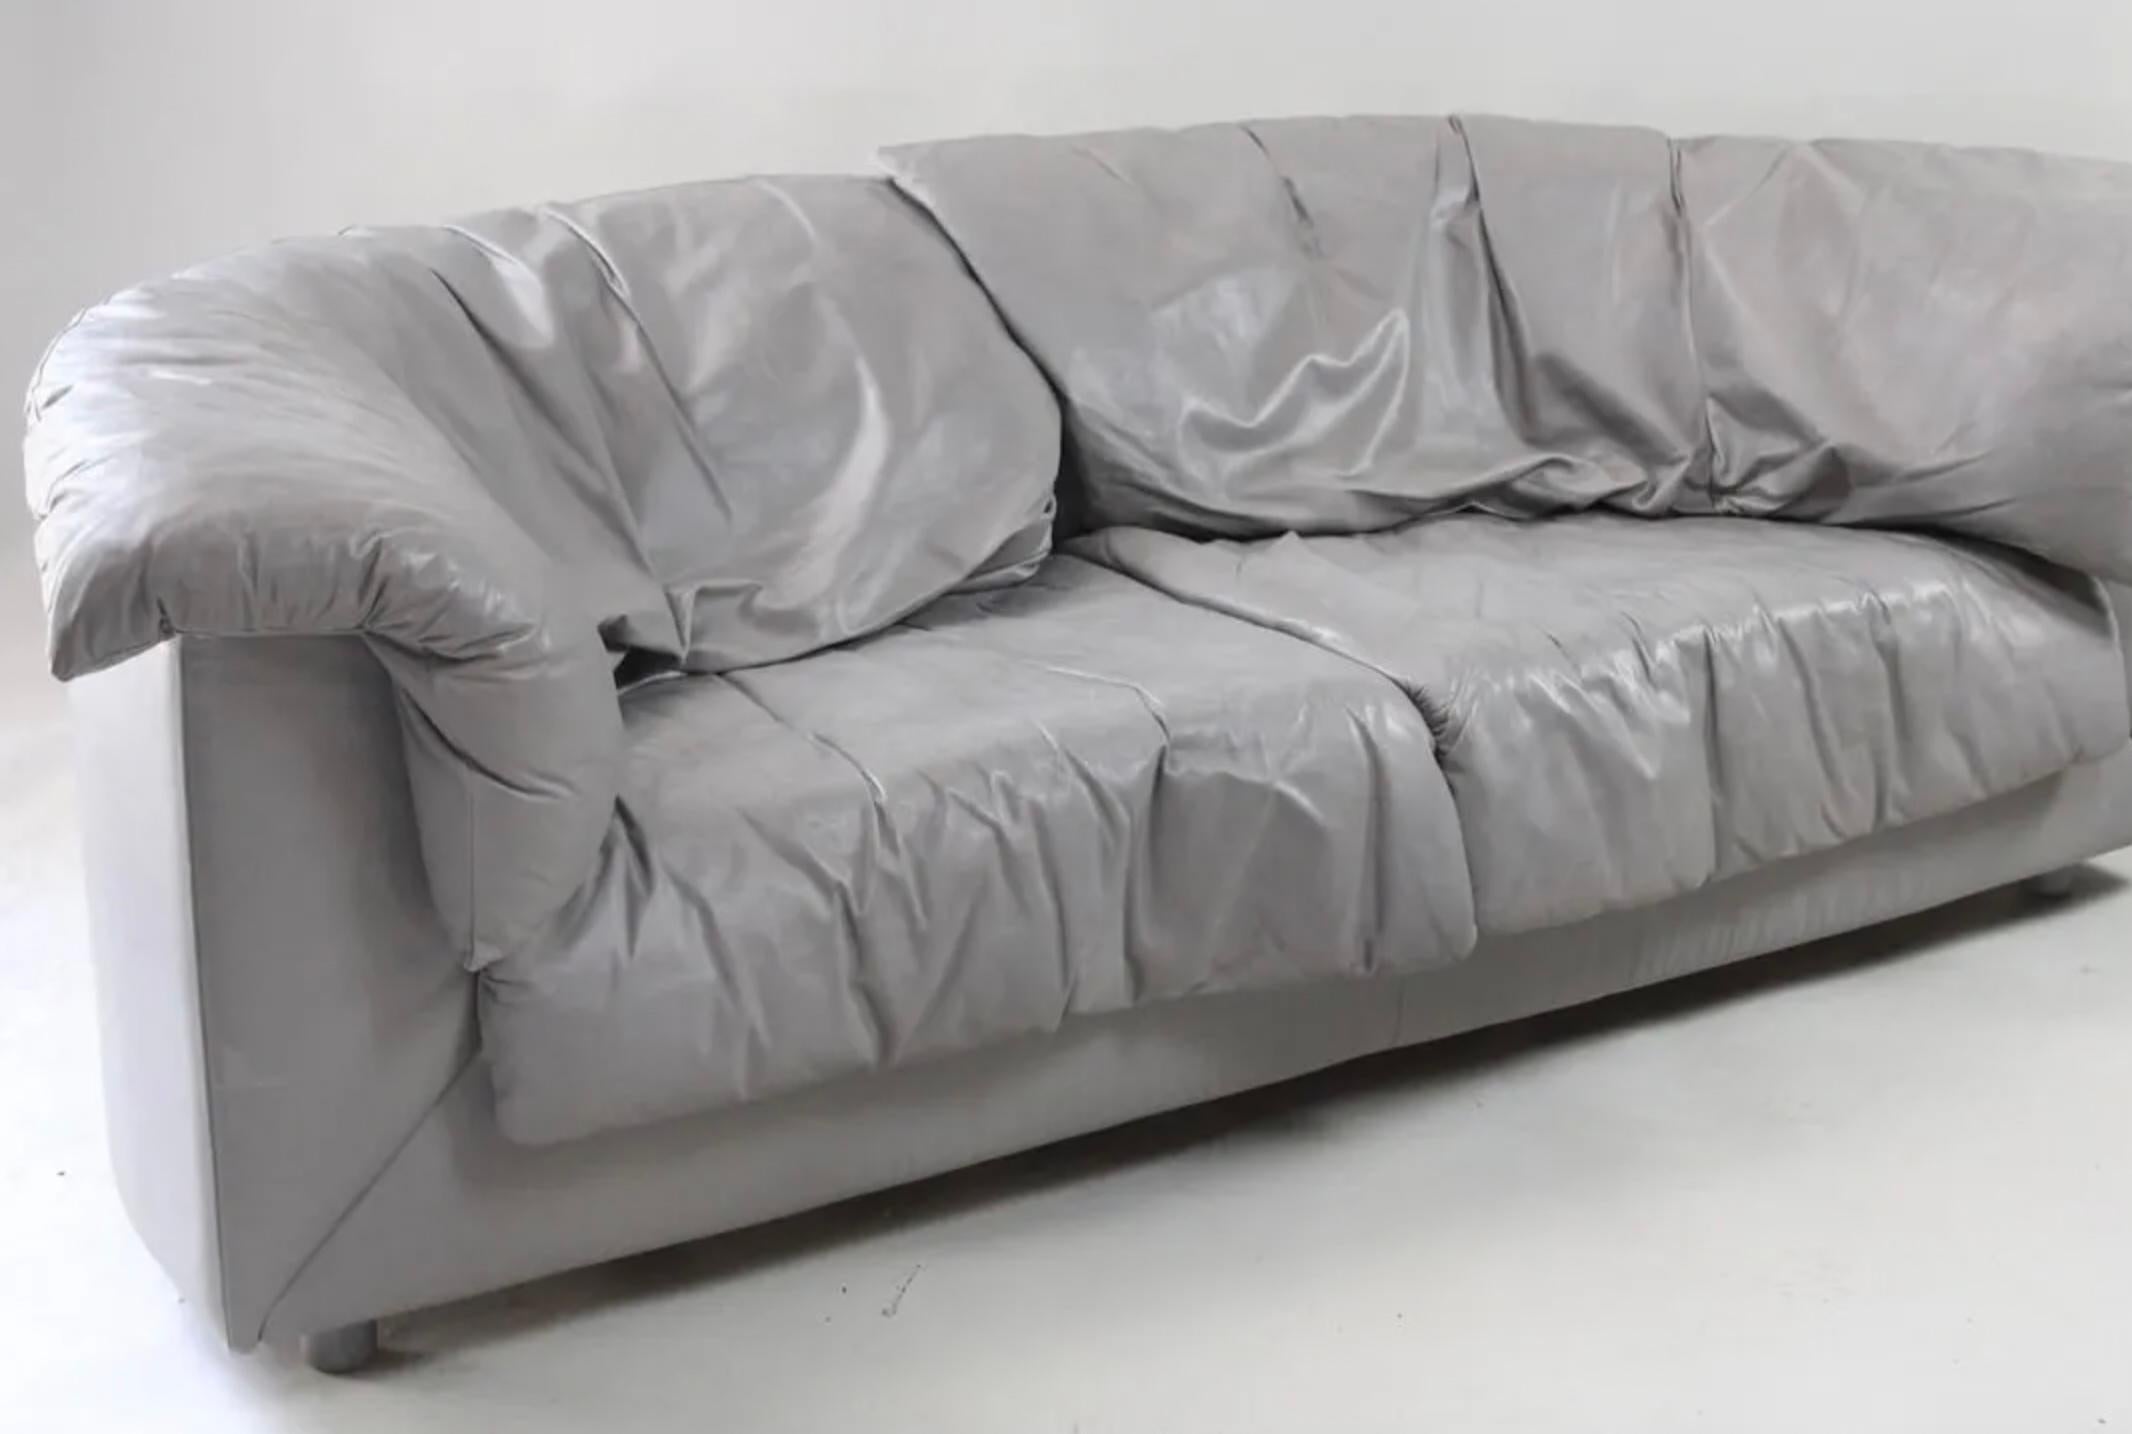 Mid century post modern De Sede gray leather long curved back Pillow sofa. Very unique half moon shaped designer loveseat with very high end thick soft Leather upholstery. Very comfortable and stylish high quality sofa. De Sede embroidered to the